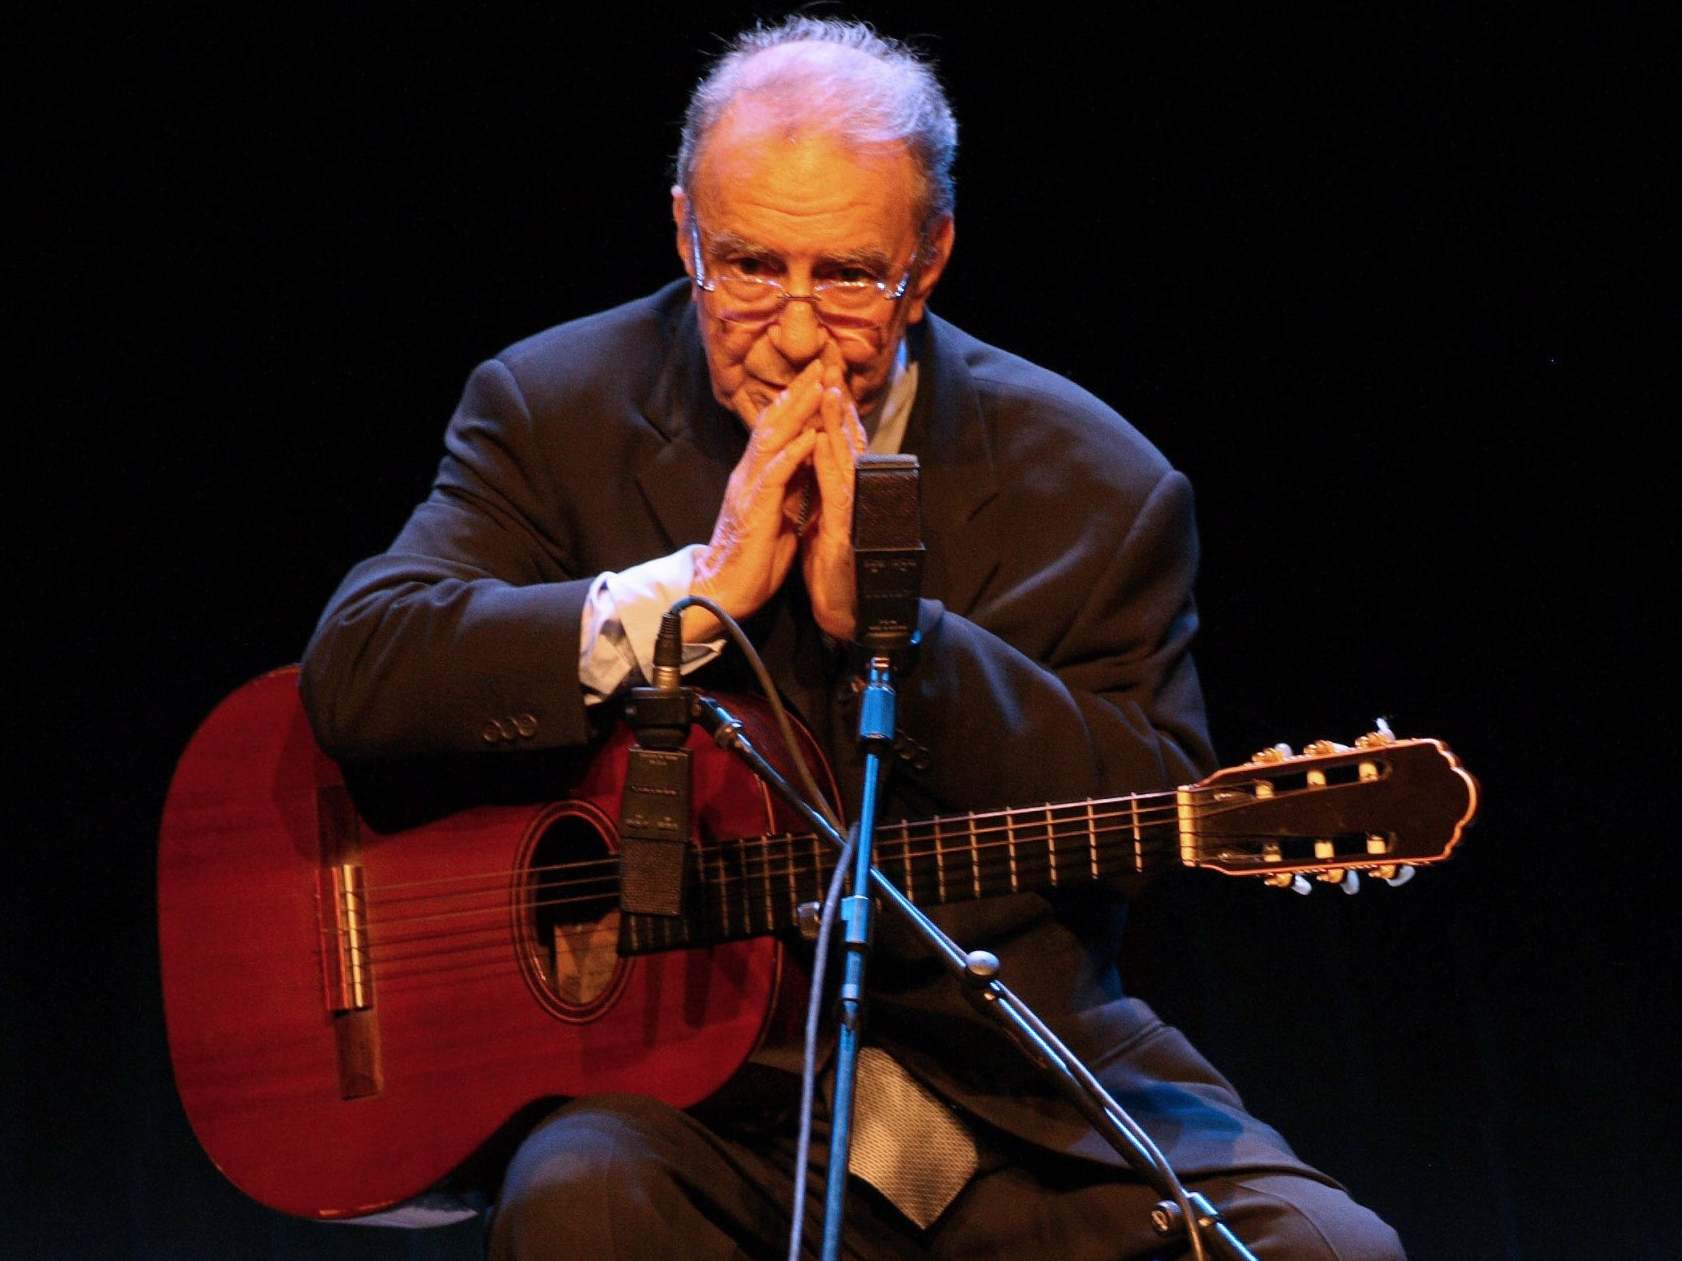 Gilberto performing in Sao Paulo in 2008